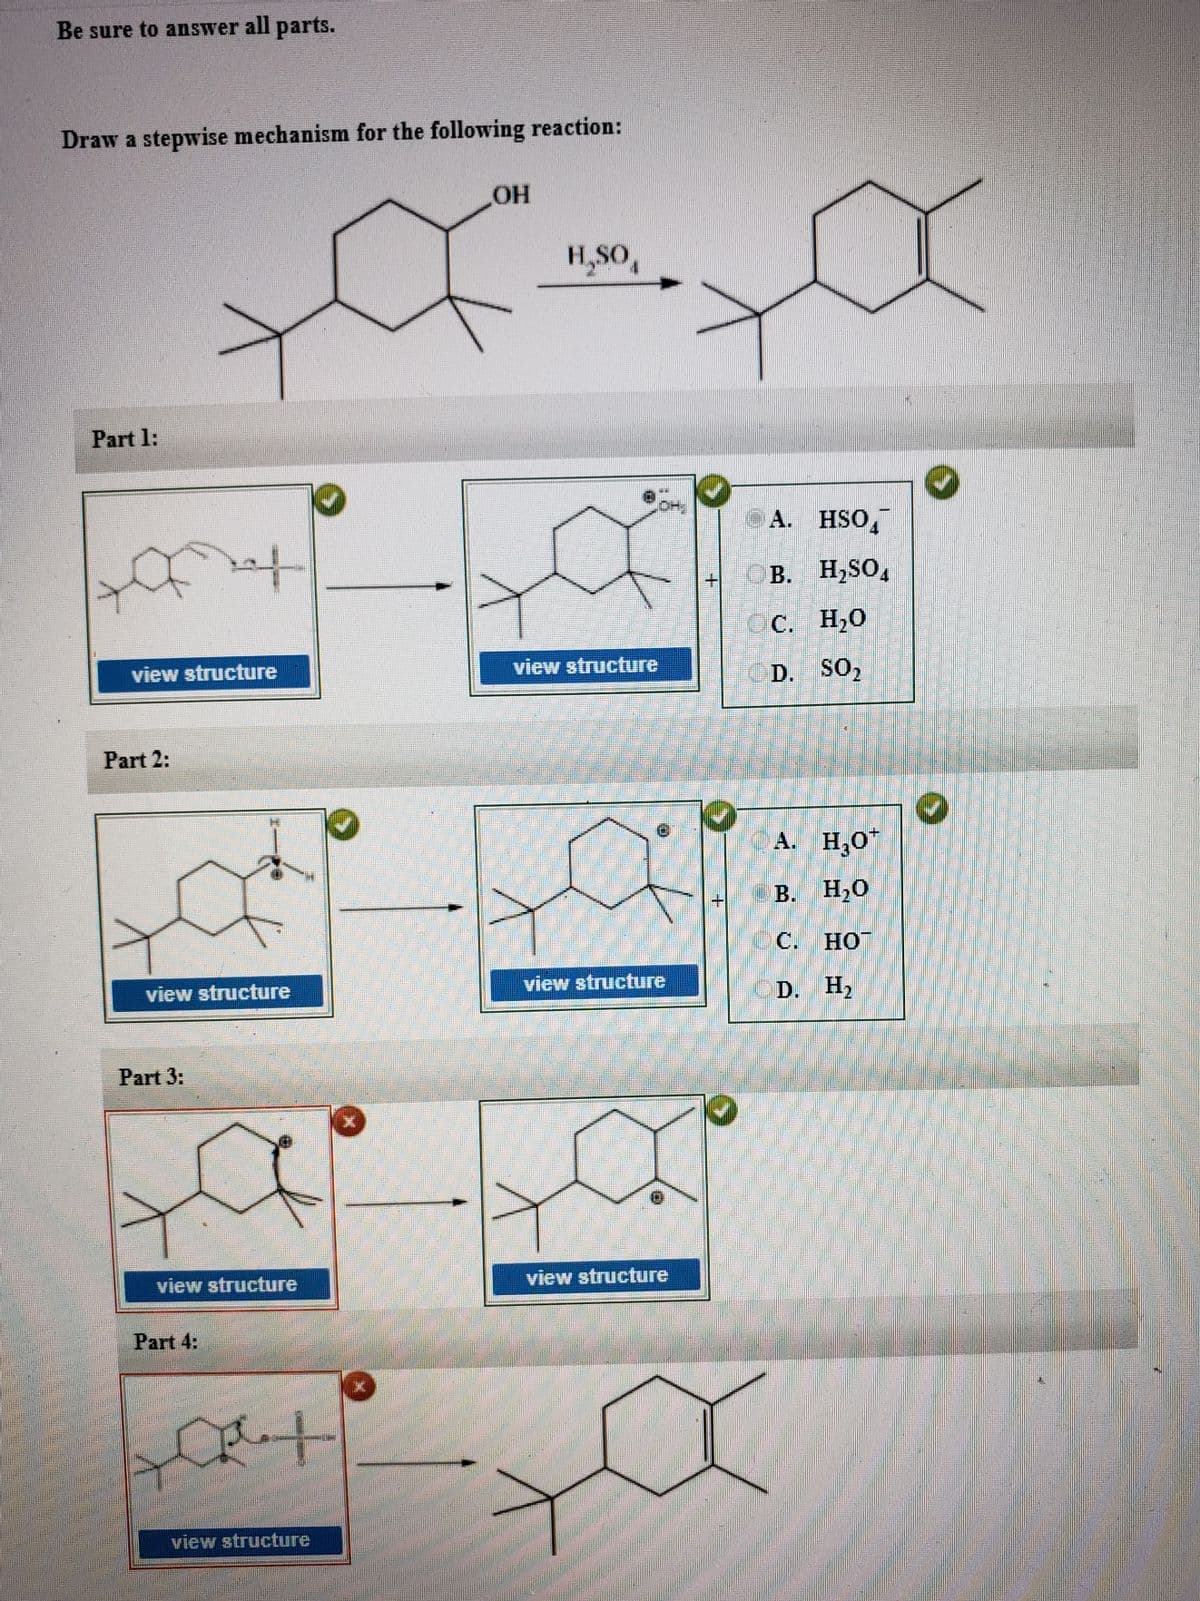 Be sure to answer all parts.
Draw a stepwise mechanism for the following reaction:
H,SO,
Part 1:
OH
eA. HSO,
4
or
B. H,SO,
C. H20
view structure
view structure
D. SO,
Part 2:
CA. H,0
B. H,0
С. НО
view structure
D. H,
view structure
Part 3:
view structure
view structure
Part 4:
view structure
